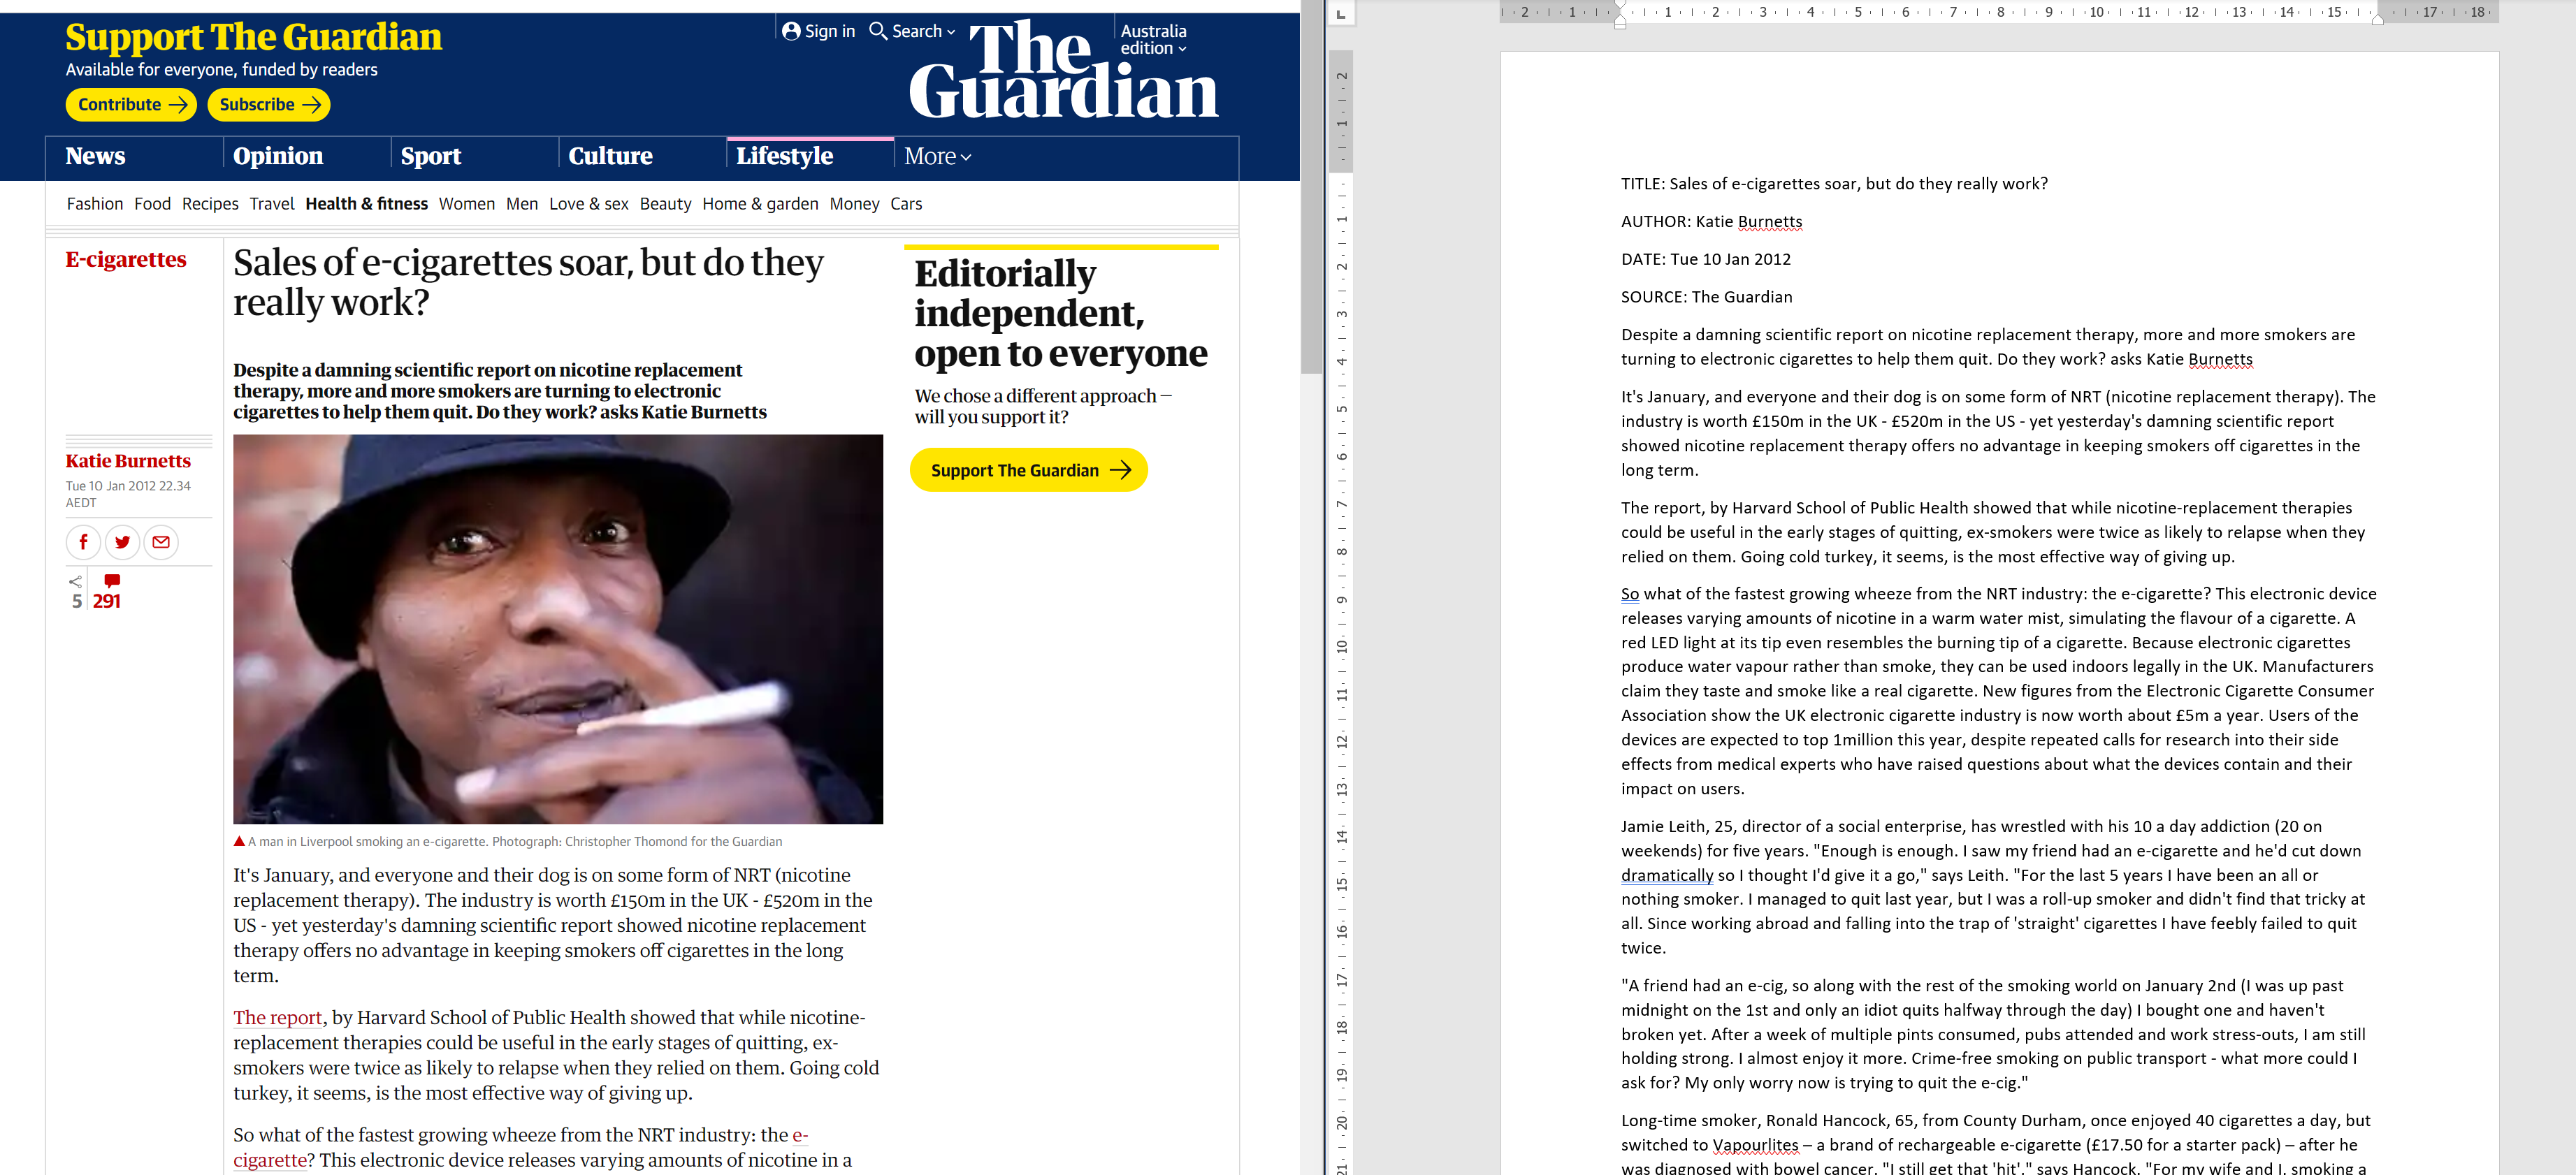 Newspaper article in Word document, next to same article on internet.